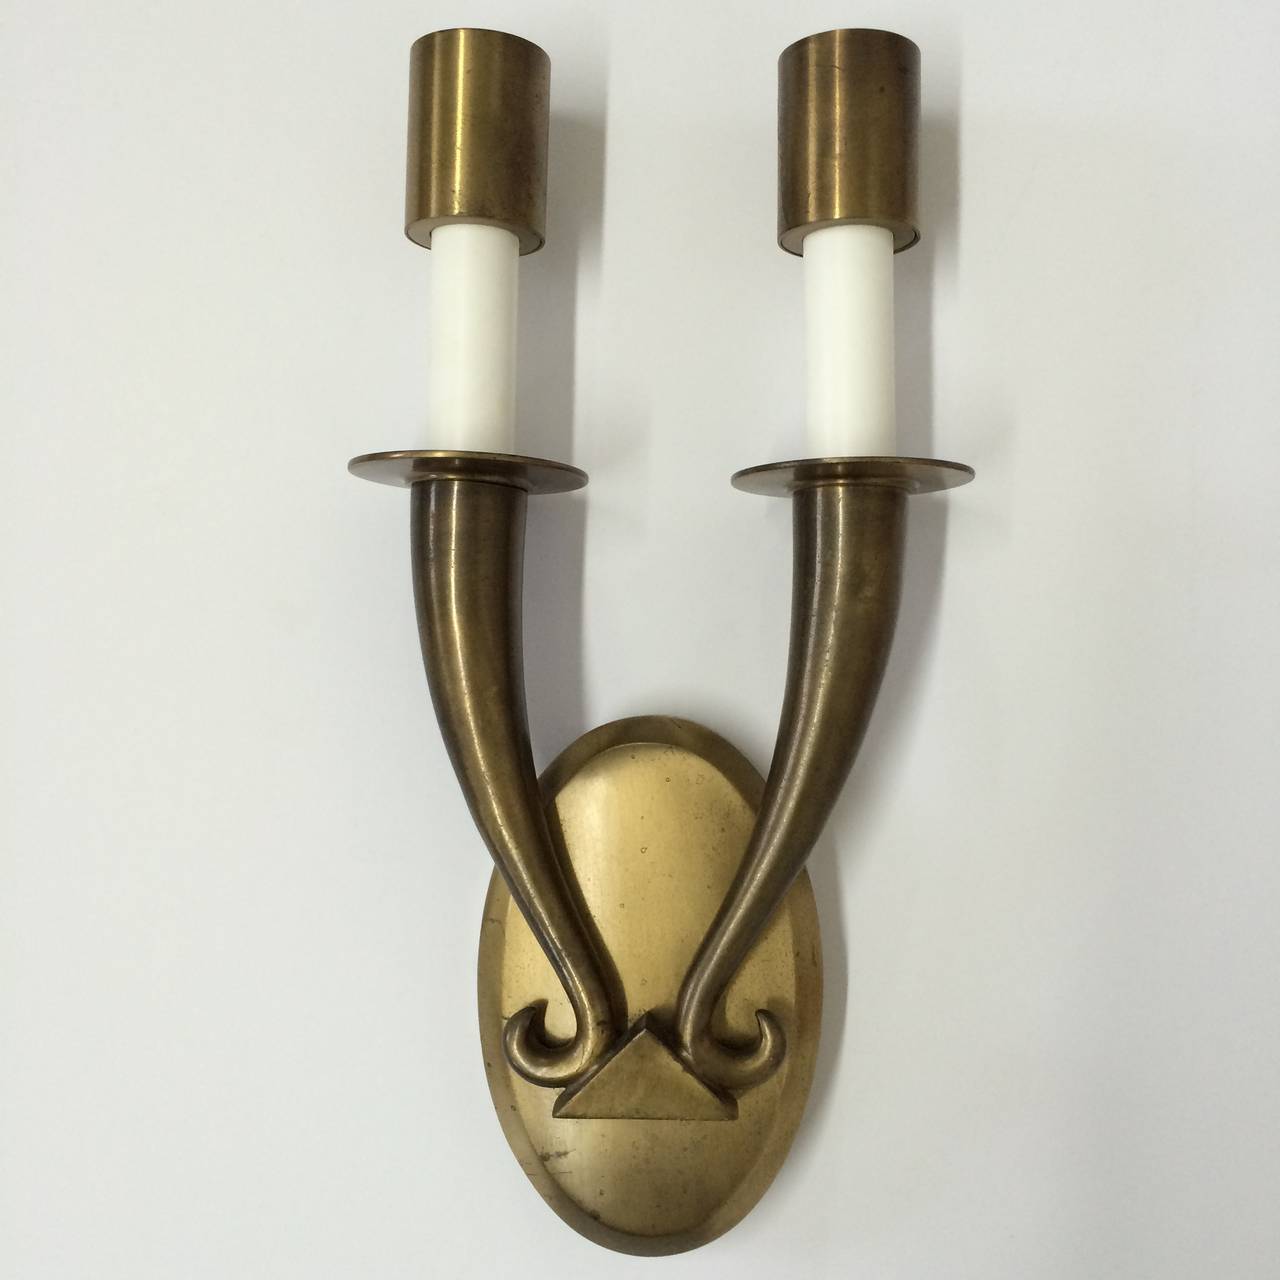 Art deco pair of wall sconces rendered in un-lacquered patinated brass in the style of Ruhlmann.